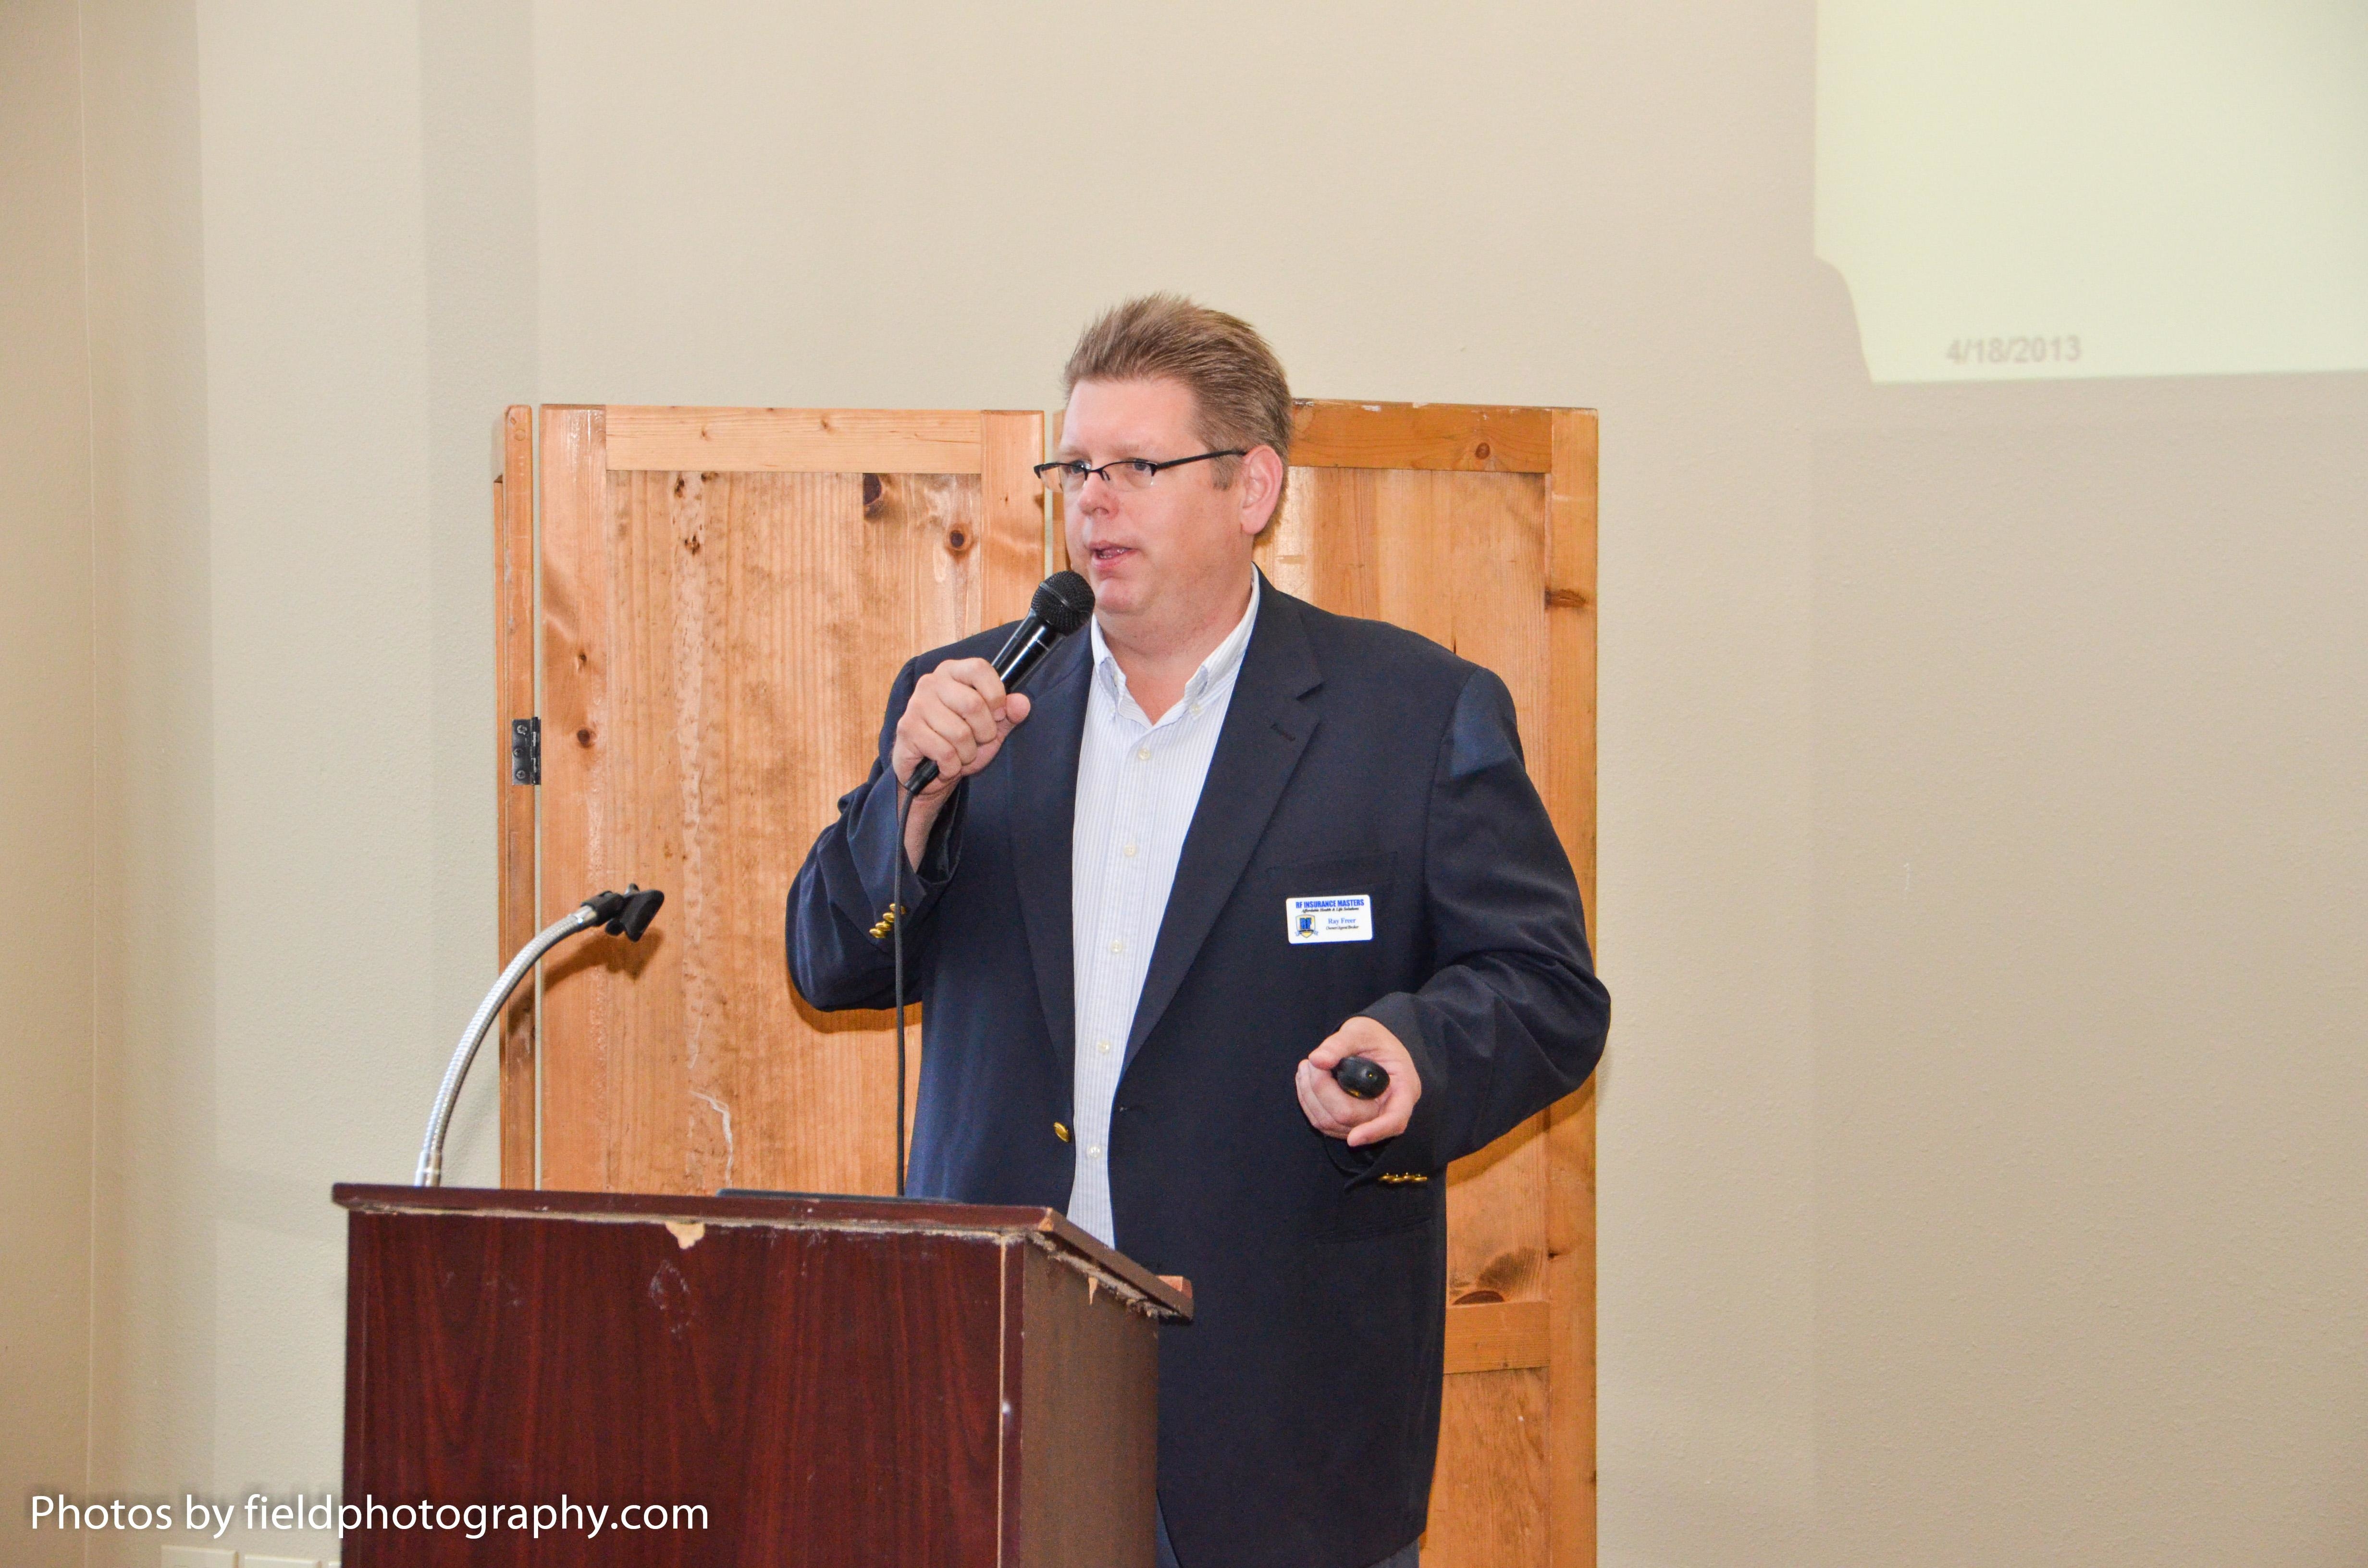 Addressing the Four Points Chamber of Commerce Luncheon in May 2013 at River Place Country Club.